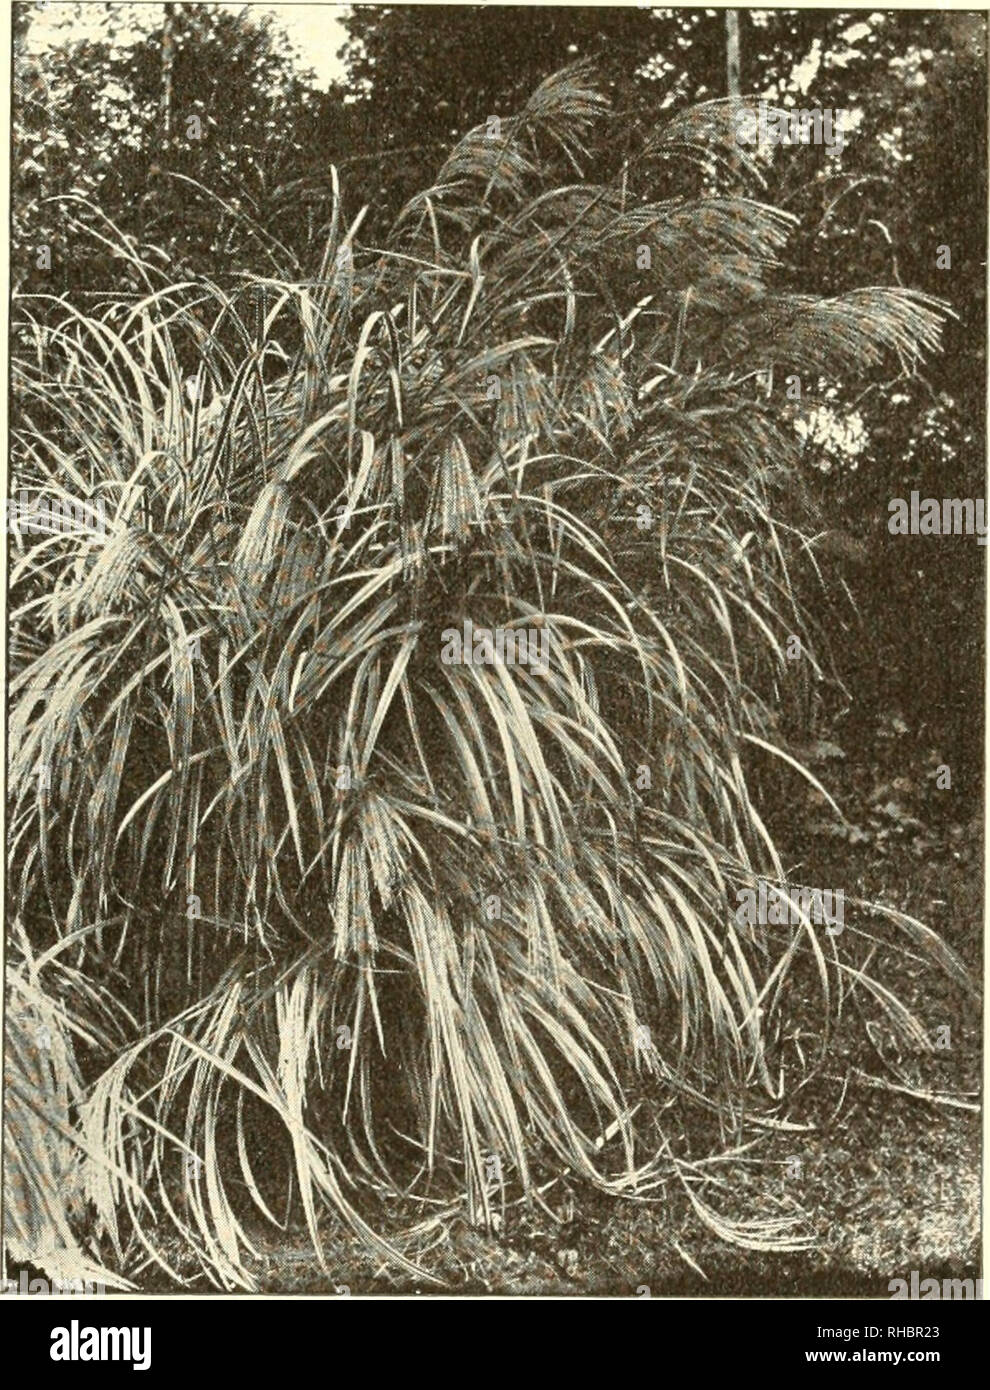 . The book of water gardening;. Aquatic plants. [from old catalog]. THE BOOK Oh WATER GART&gt;ENING feet high; it has dark brown flower panicles. The plants arc propa.i,^ated by di- vision of the roots in Spring or Fall. Phalaris arundinacea variegata (Gardeners' Garters) is a fine low-growing, variegated hardy perennial grass, from two to three feet in height; the leaves are striped white. Uniola latifolia is a native perennial grass, growing to a height of from three to four feet; it has large, loose drooping flower panicles.. EULALIA JAPONICA VARIEGATA A beautiful grass with -white stripes  Stock Photo